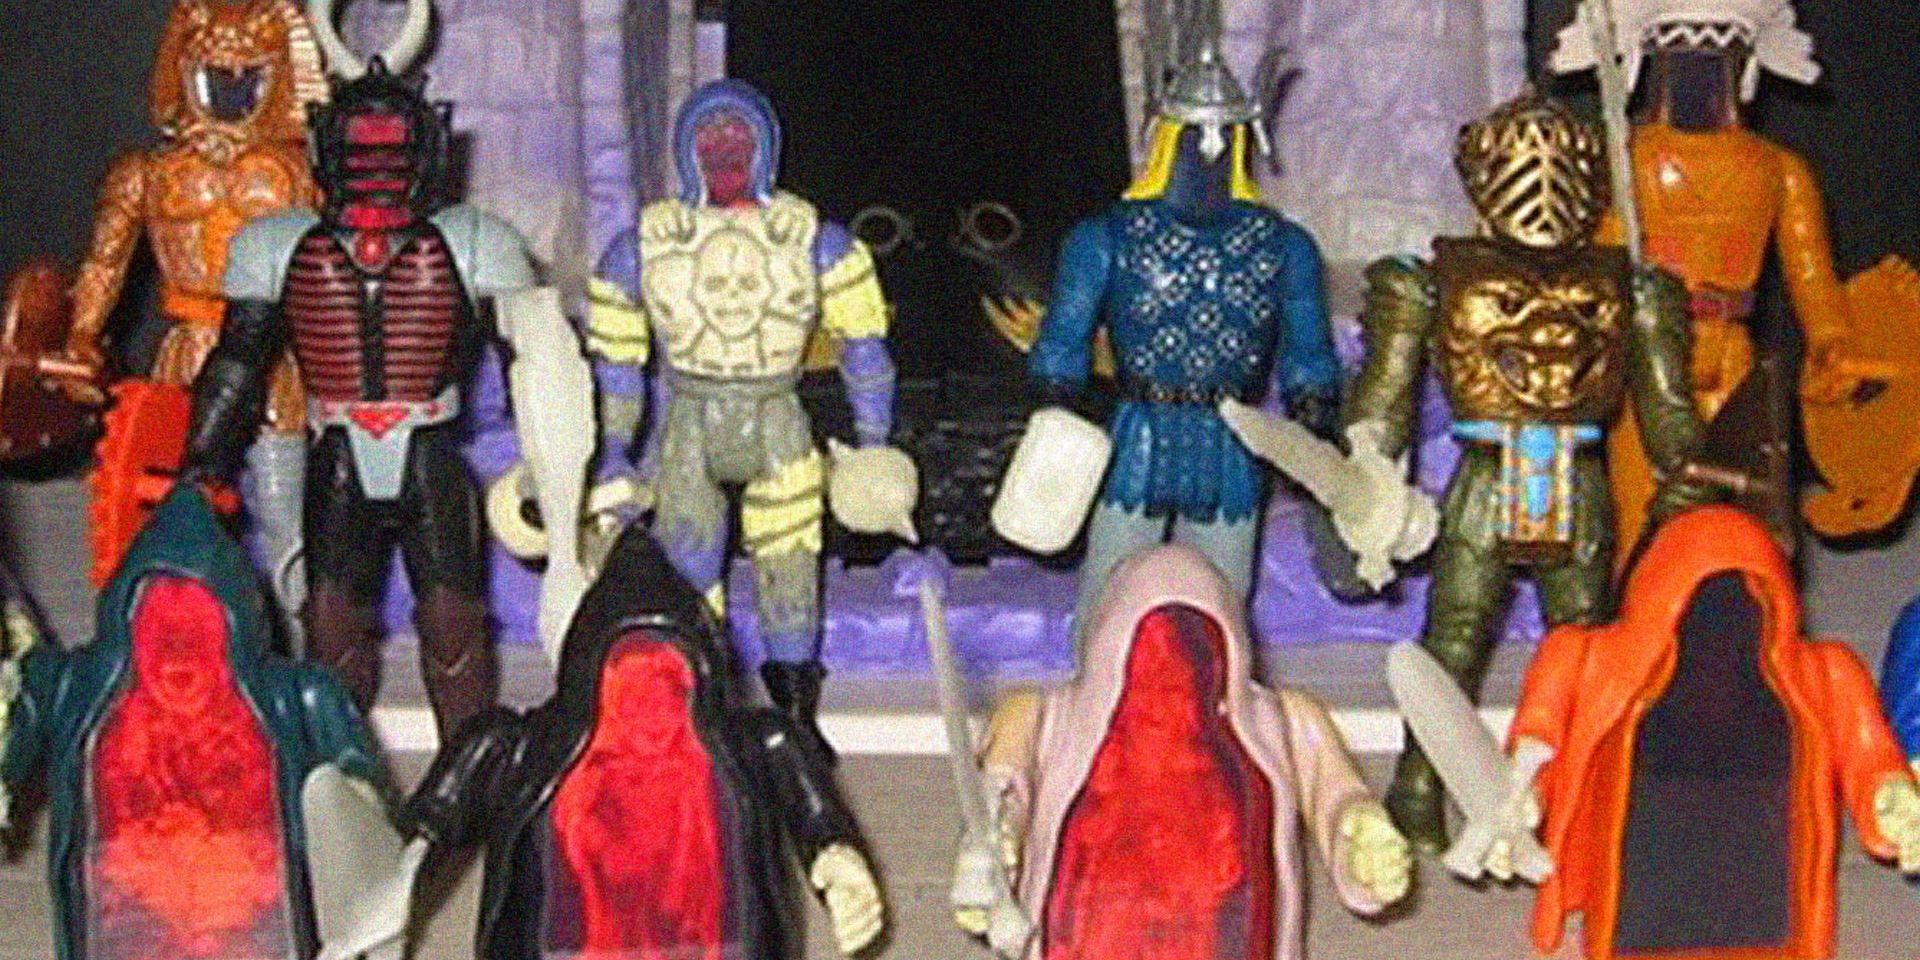 Toys of characters from Super Naturals standing behind spirit figures